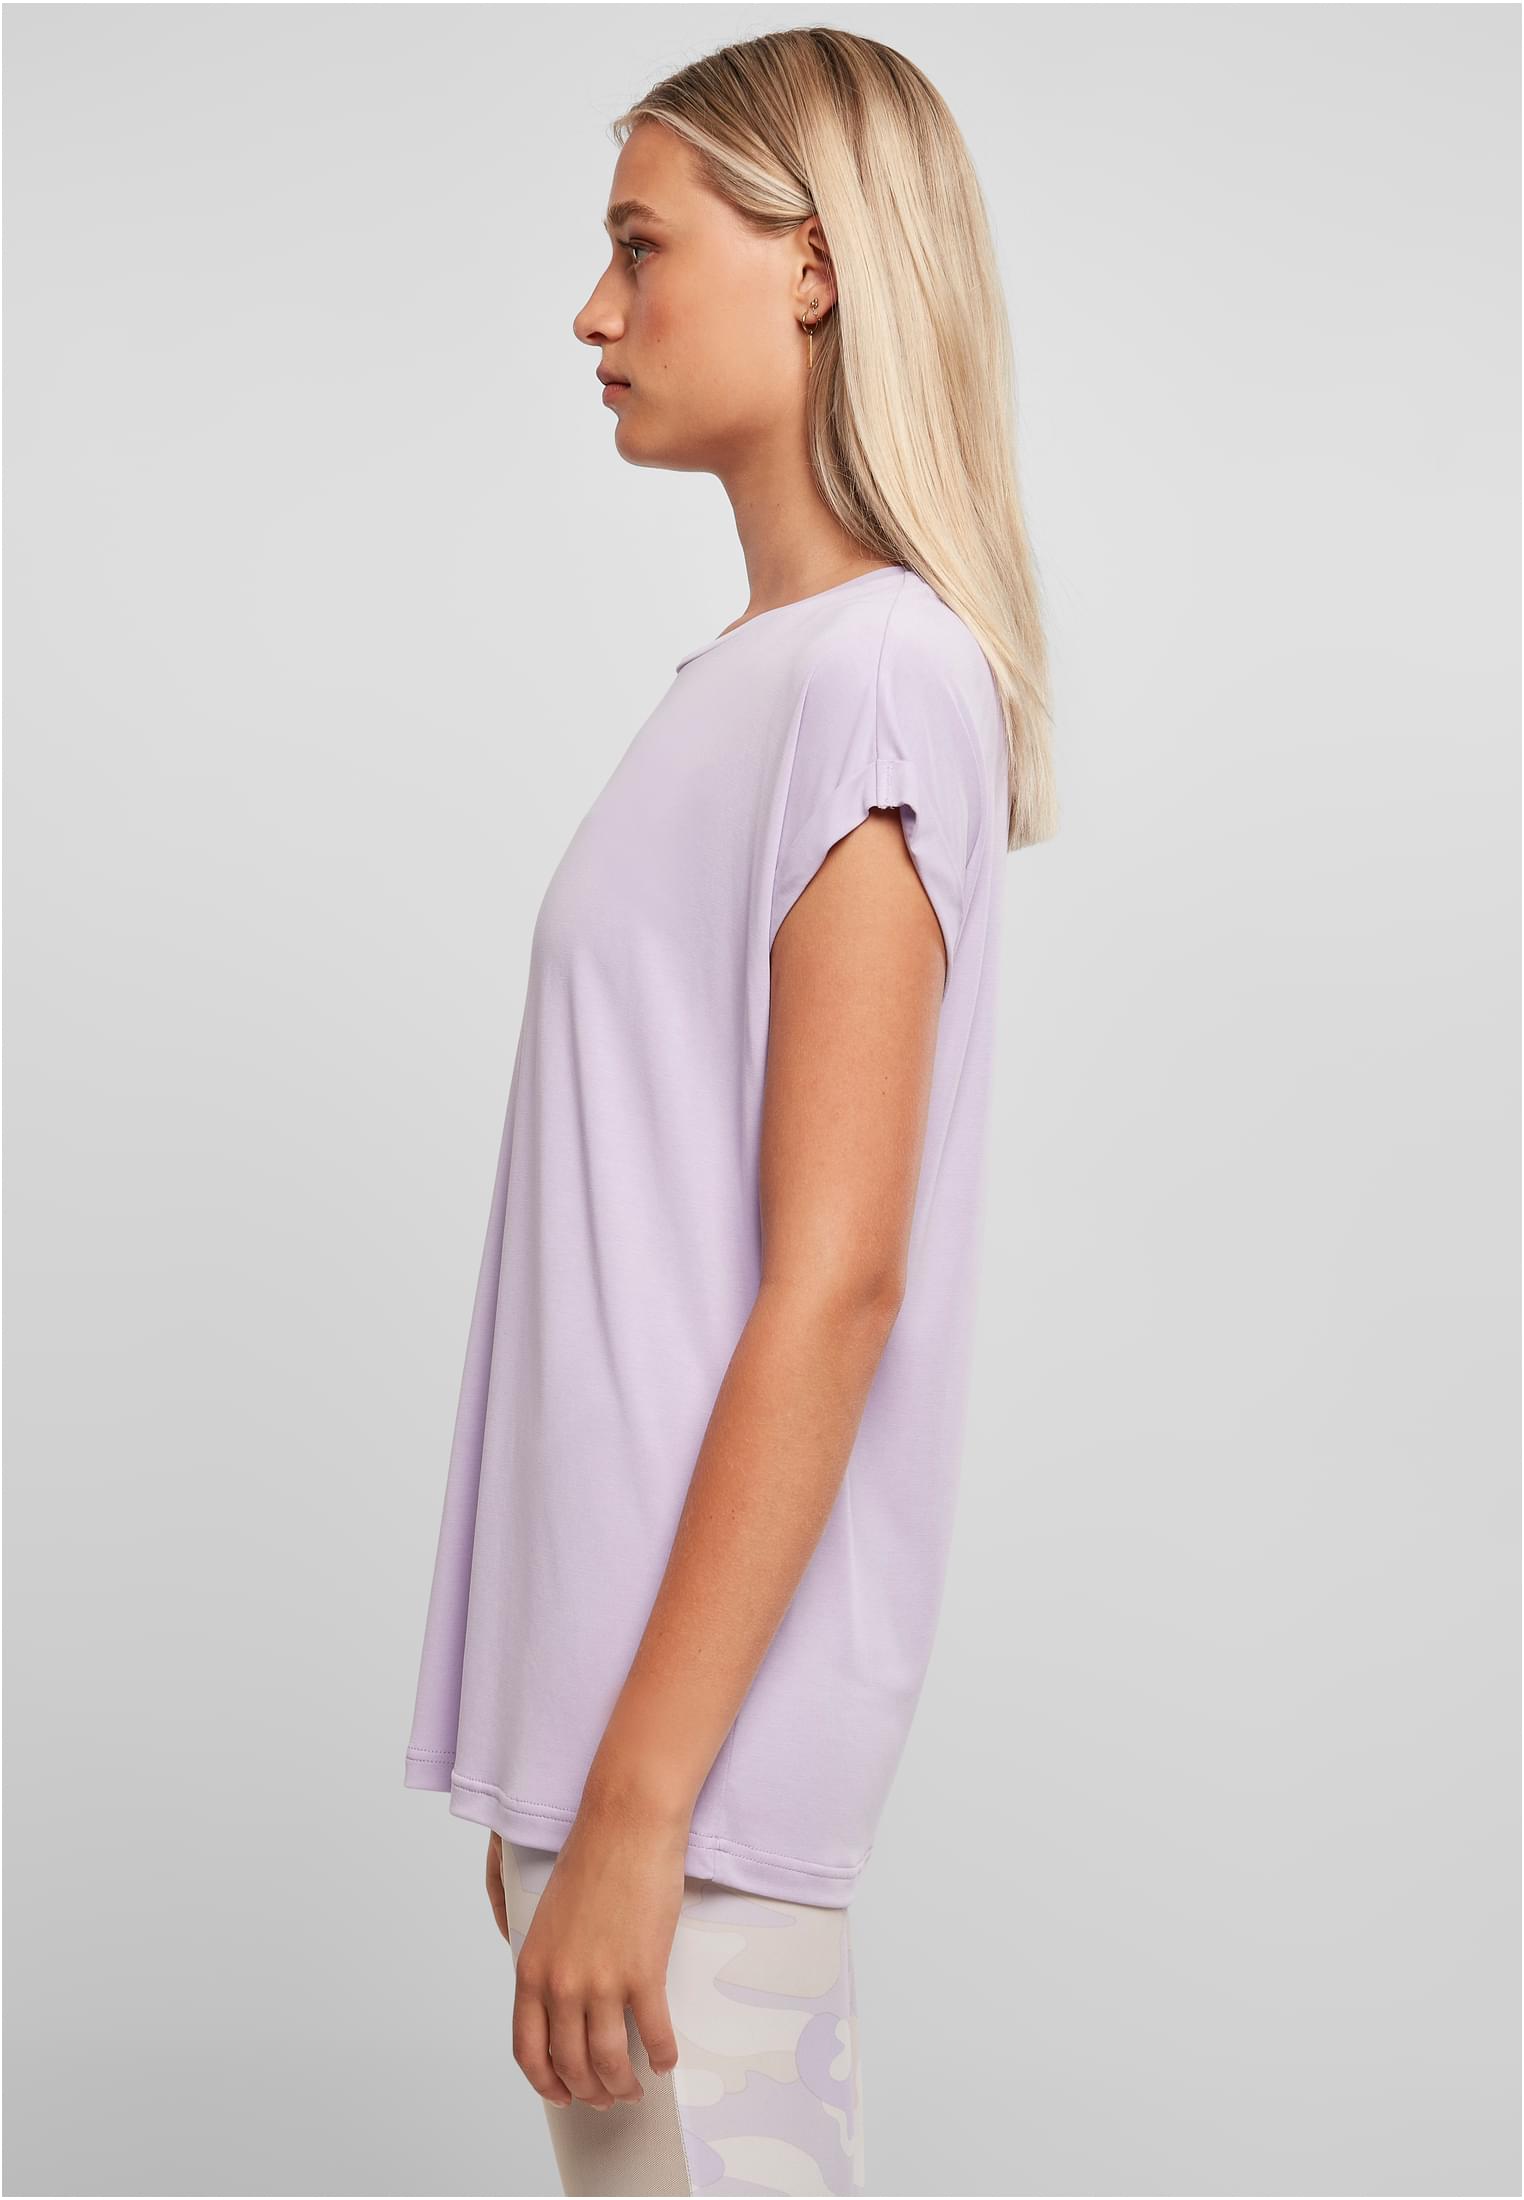 Frauen Ladies Modal Extended Shoulder Tee in Farbe lilac